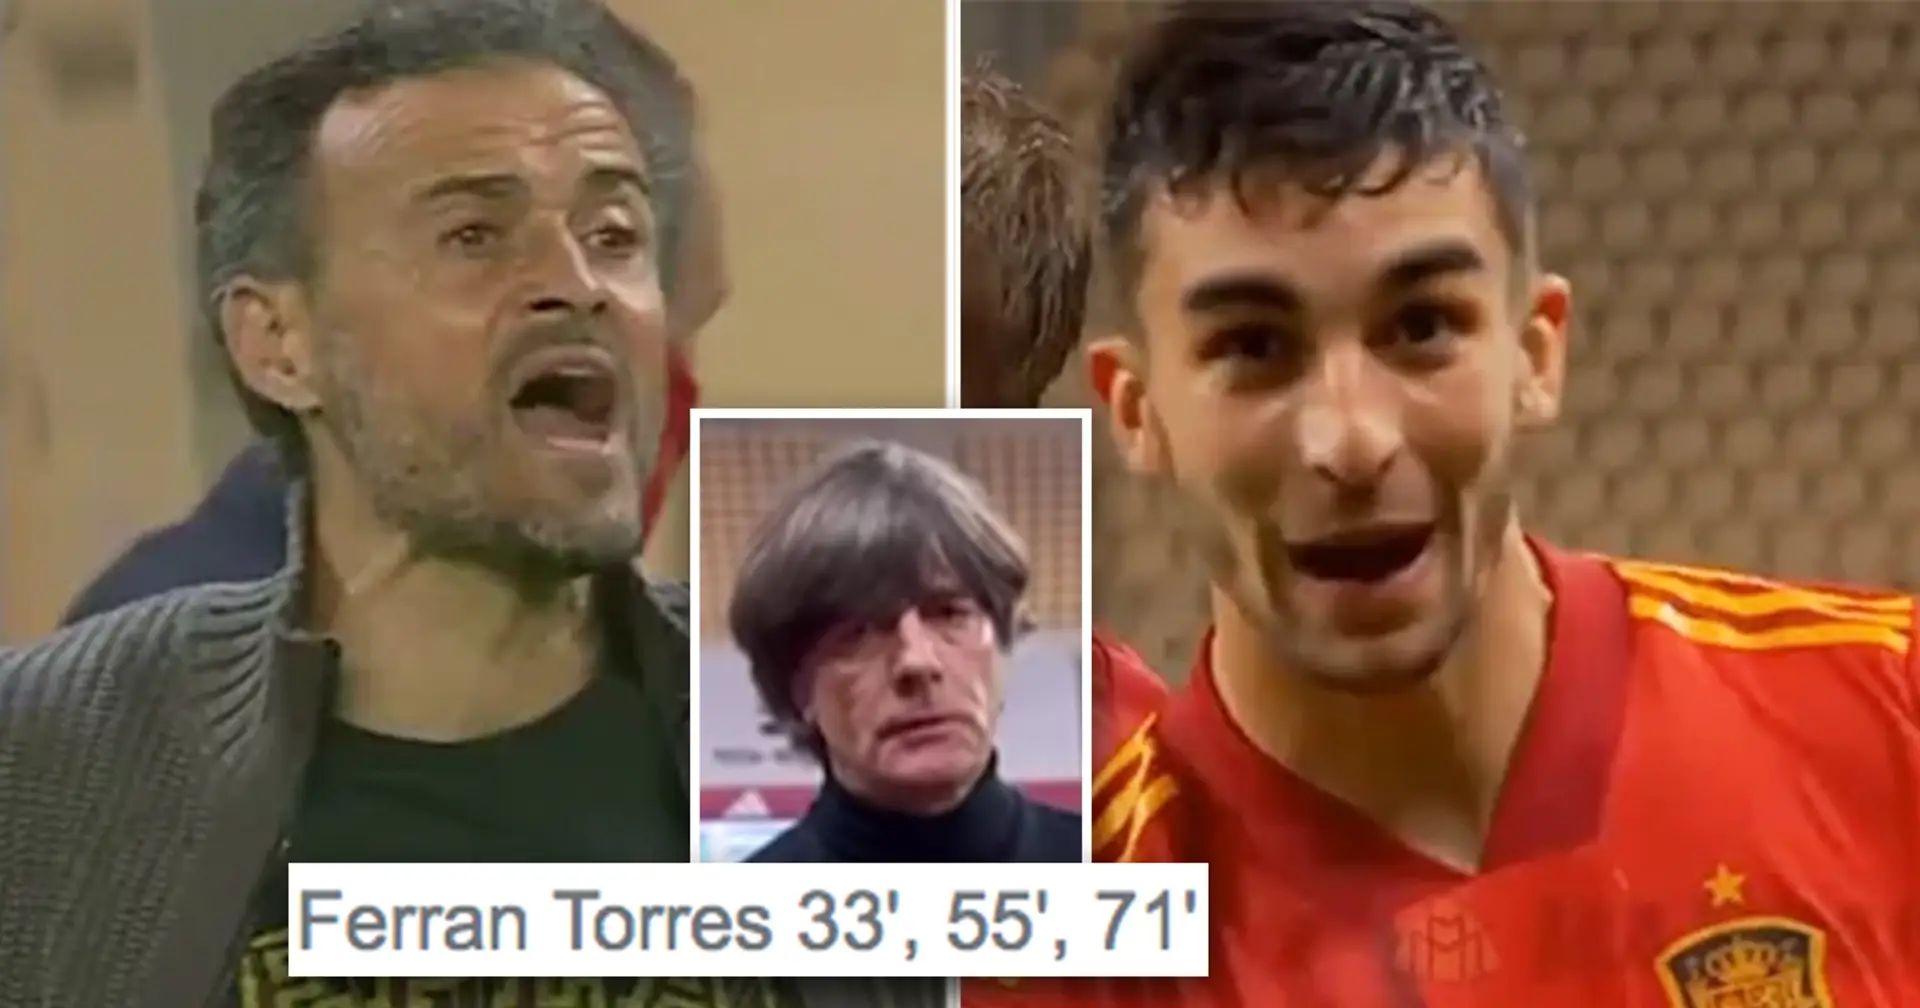 Ferran hat-trick and more: What happened the last time Spain faced Germany